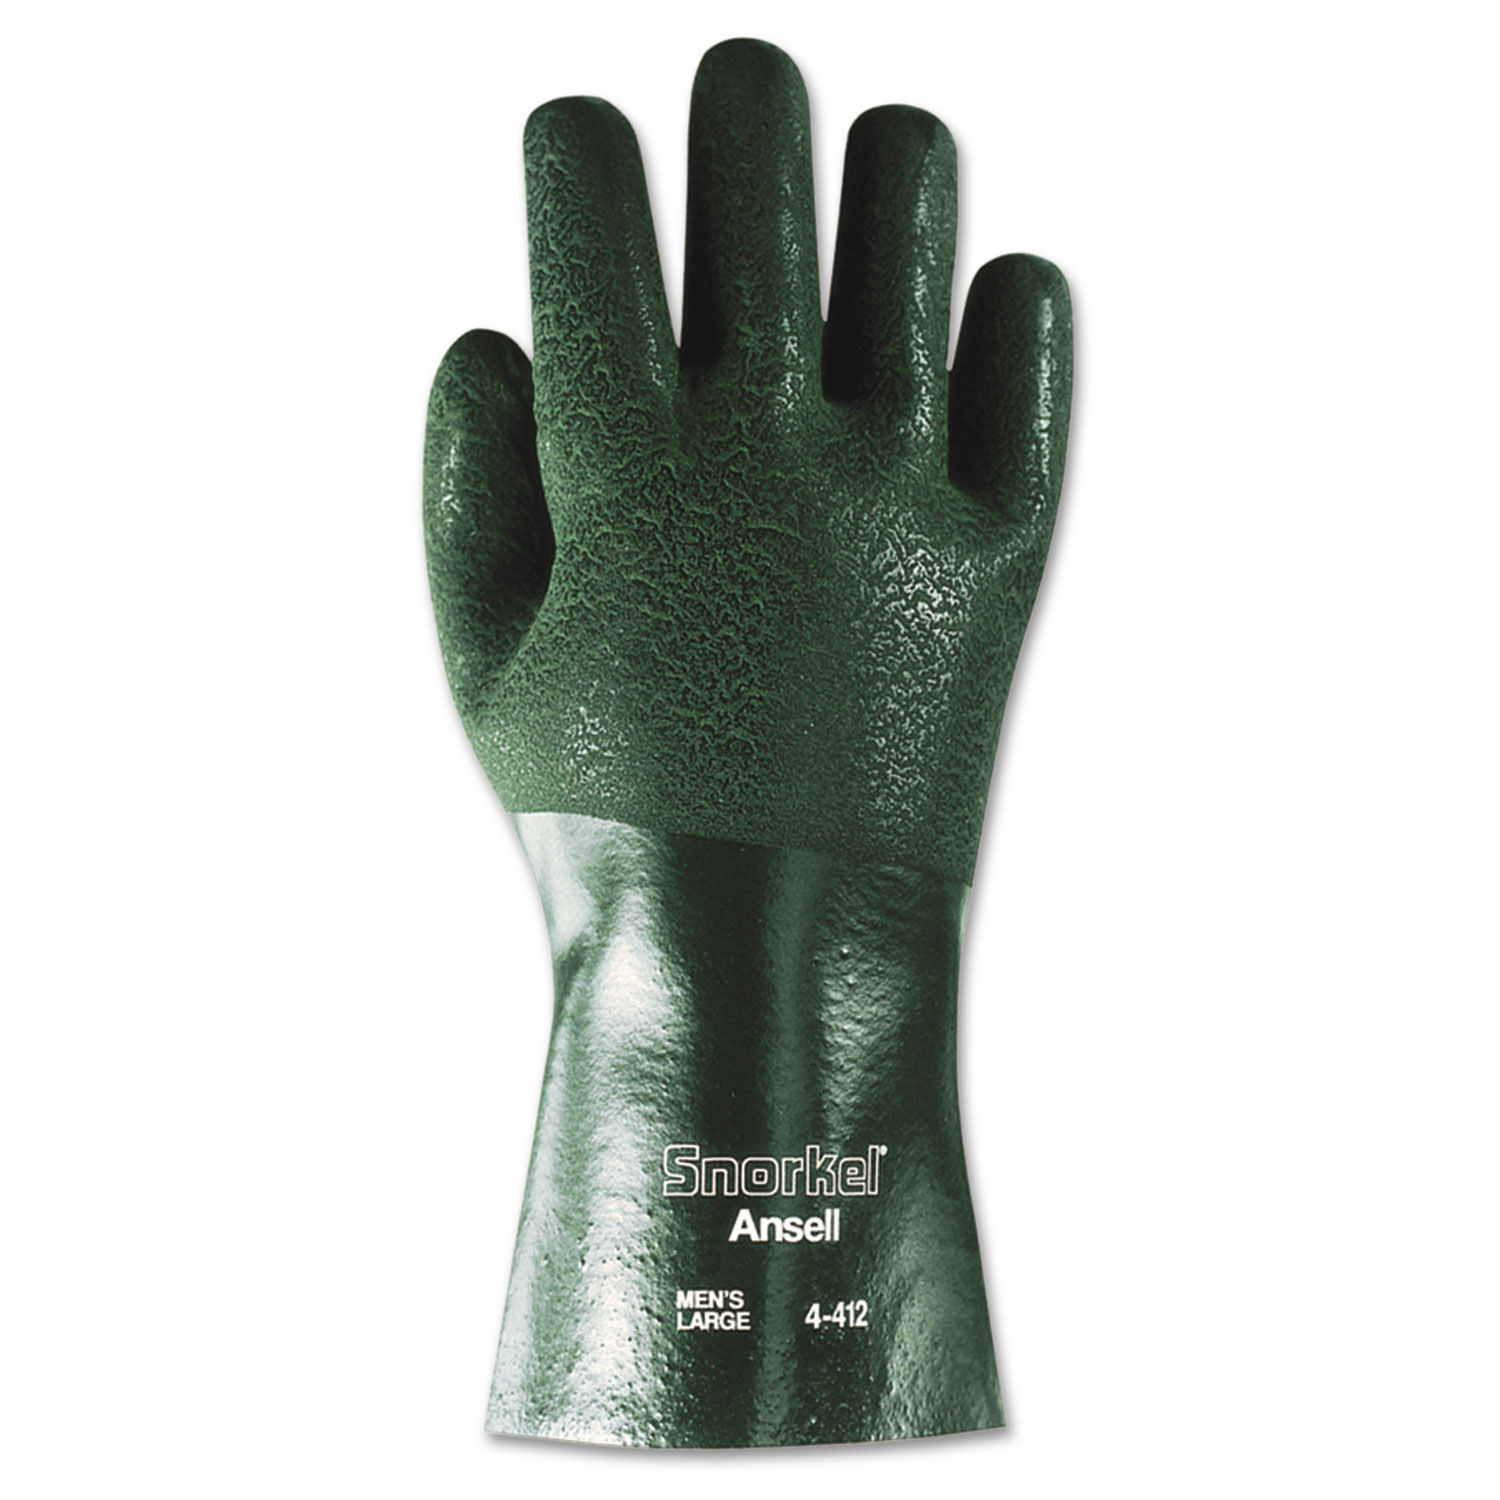  AnsellPro 211135 Snorkel Chemical-Resistant Gloves, Size 10, PVC/Nitrile, Green, 12 PR (ANS441210) 